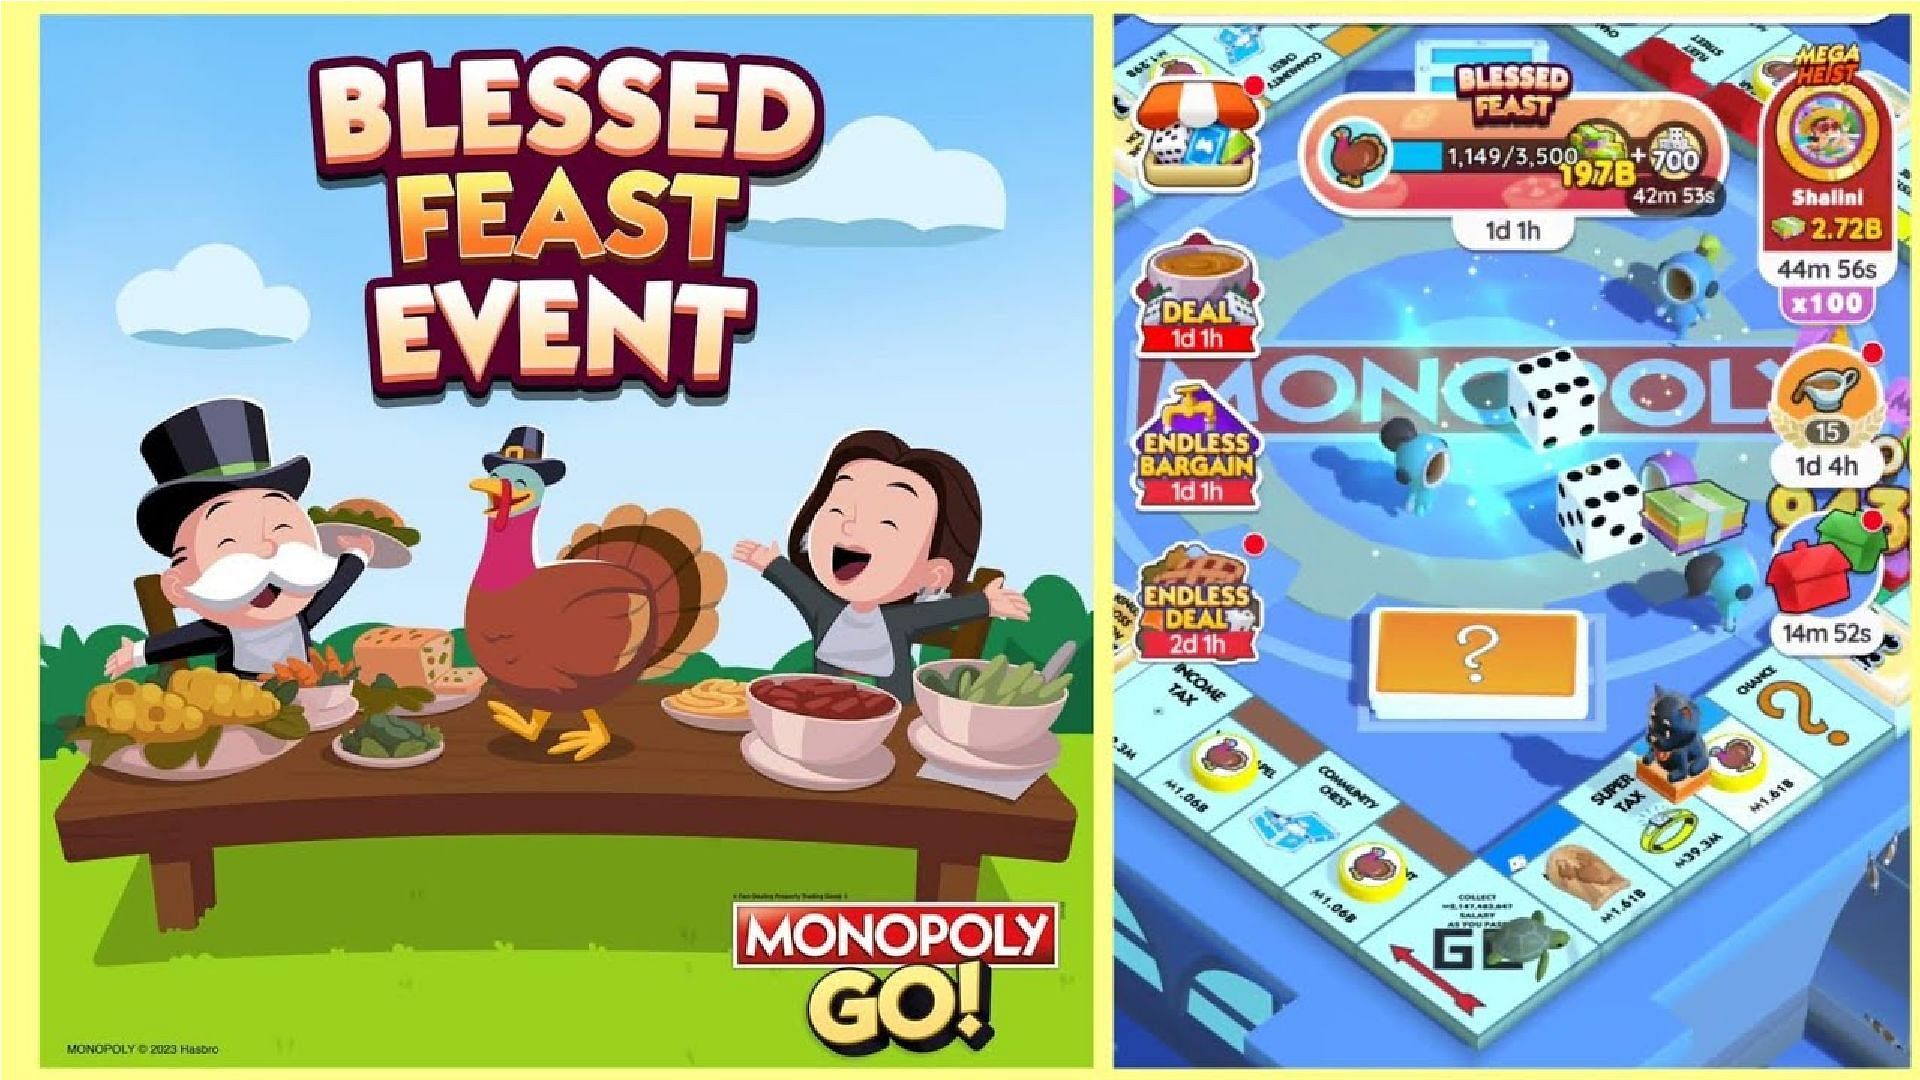 Monopoly Go Blessed Feast event